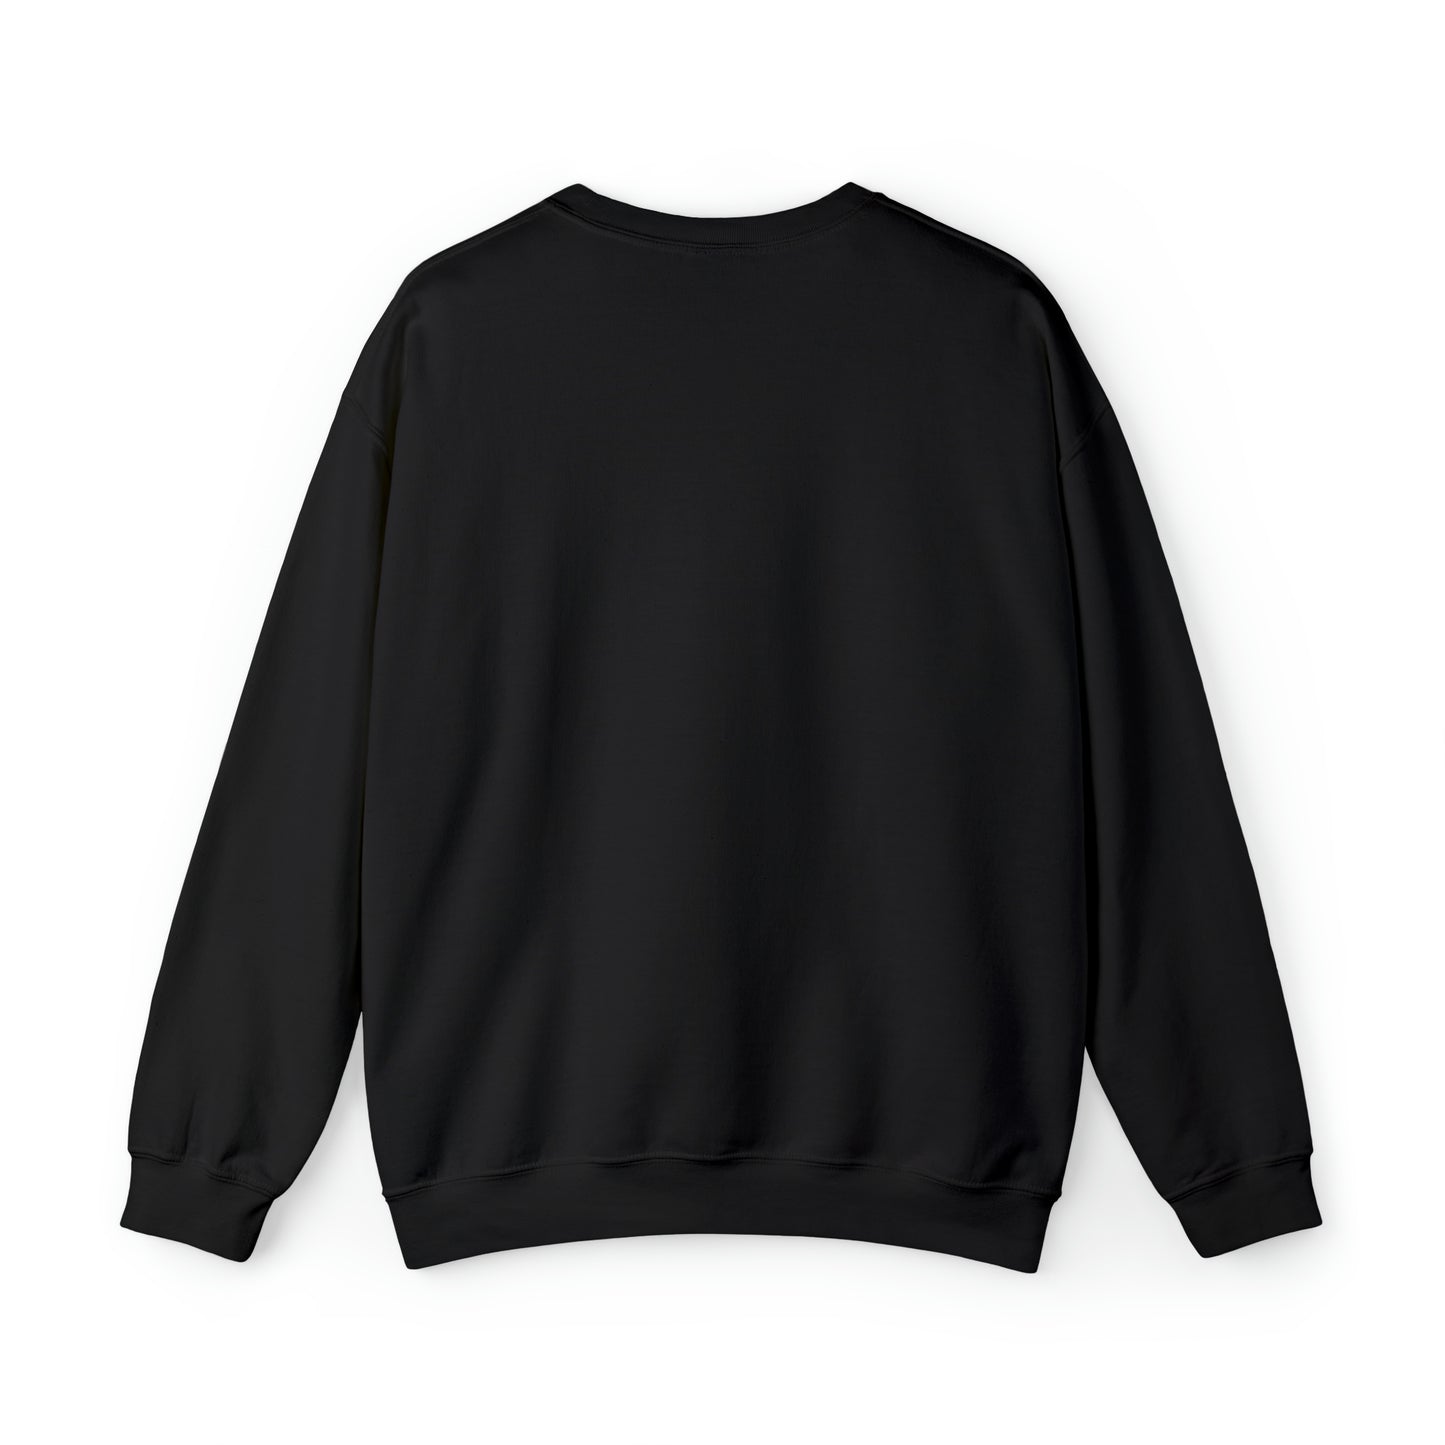 Load image into Gallery viewer, 100% That Witch Crewneck
